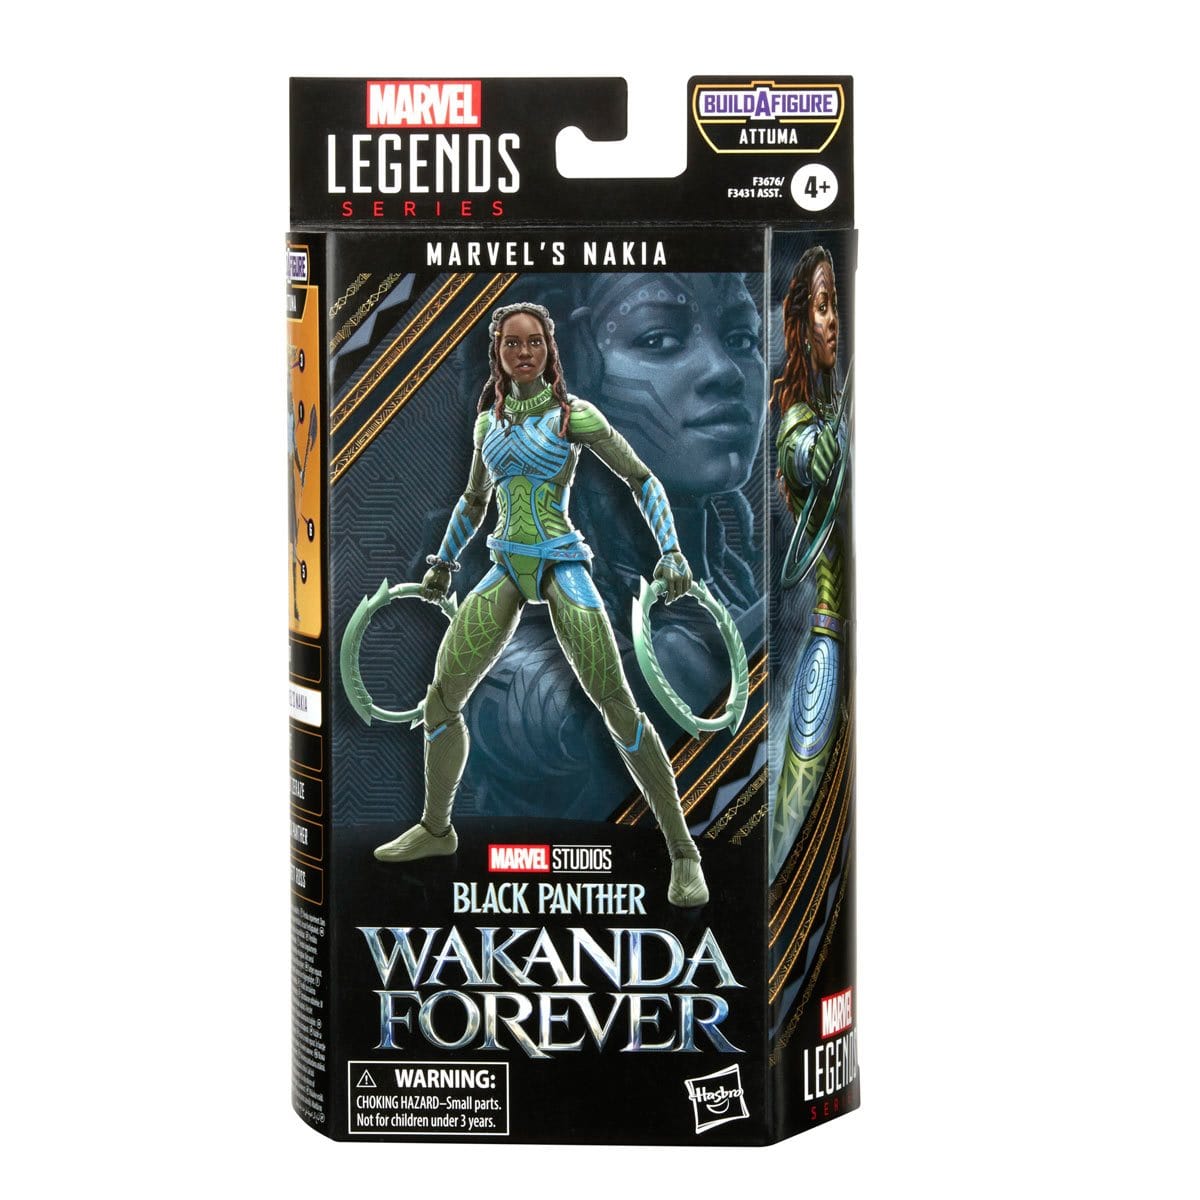 Black Panther Wakanda Forever Marvel Legends 6-Inch Nakia Action Figure front of box